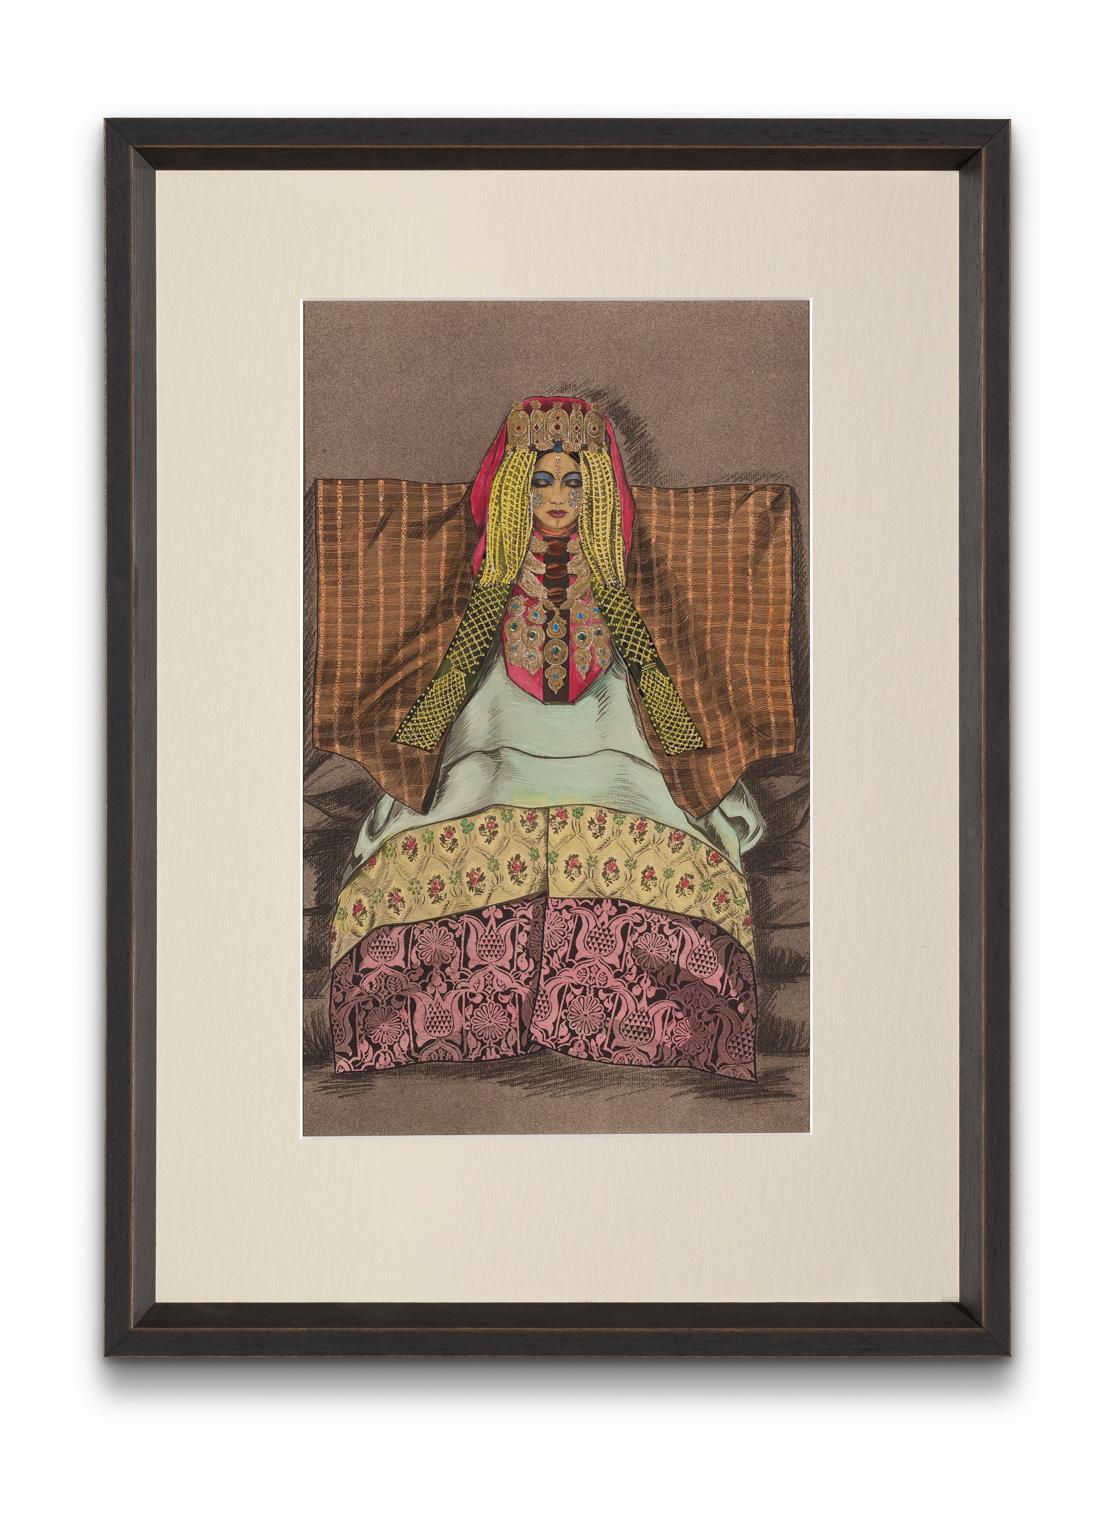 Jean Besancenot Portrait Print - "Woman of the Imerrhane" from "Costumes of Morocco", Gouache on Paper